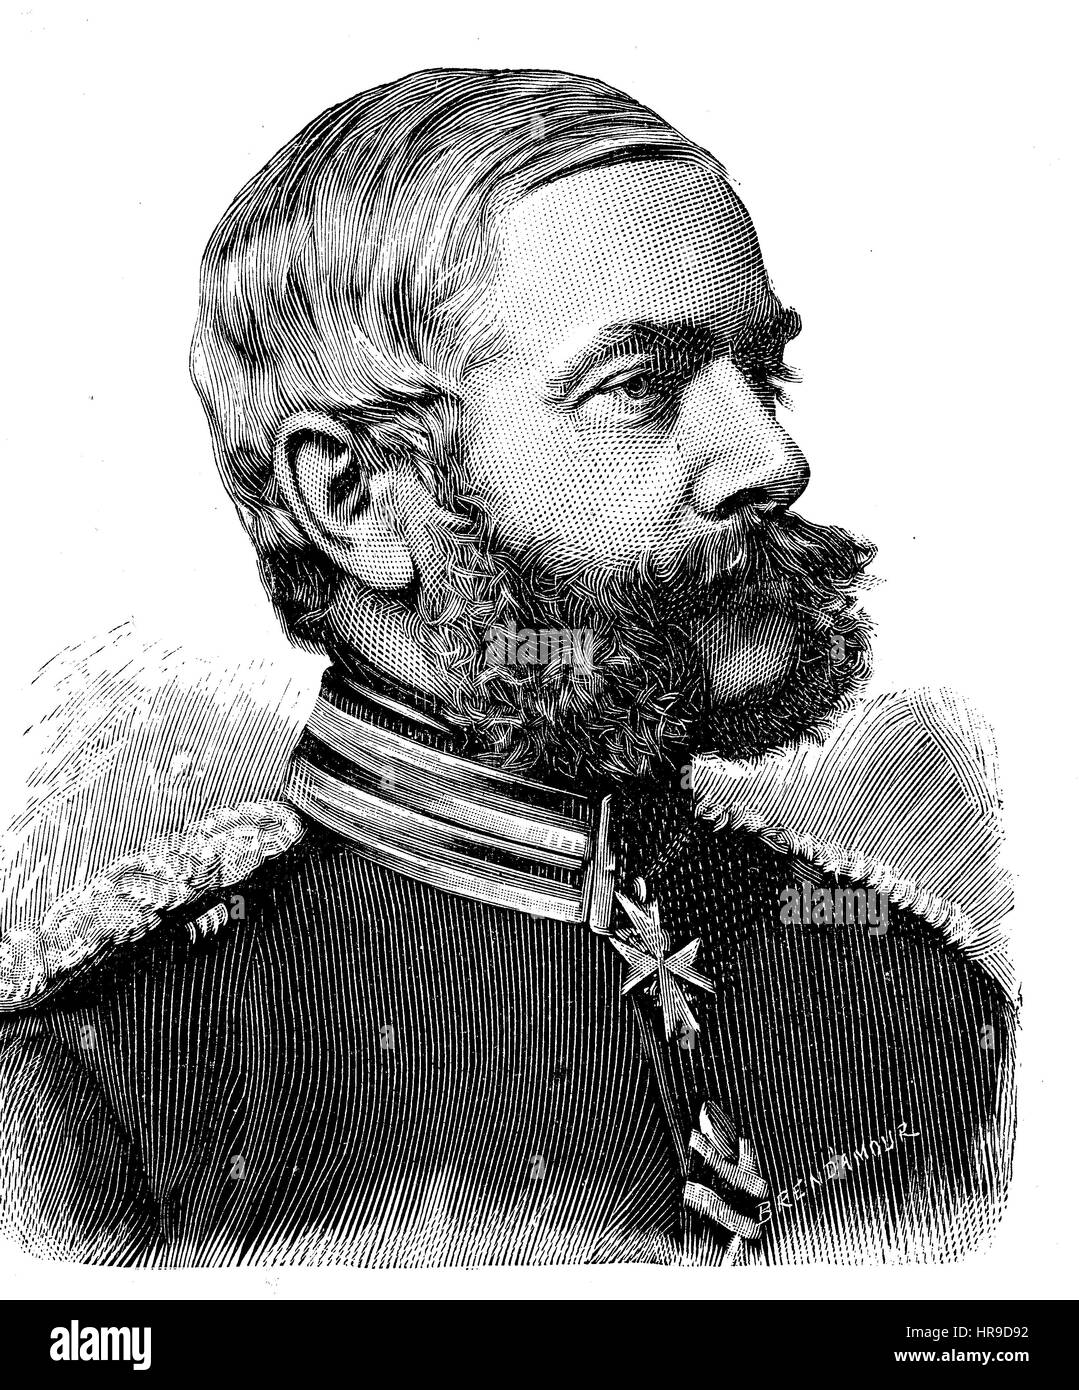 'Viktor von Erckert, 1823 - 1870, preussischer Offizier, Bearer of the order Pour le Marit, as commander-in-chief of the garde auxiliaries; He fell to St. Privat in the Franco-Prussian War, Situation from the time of The Franco-Prussian War or Franco-German War,  Deutsch-Franzoesischer Krieg, 1870-1871', Reproduction of an original woodcut from the year 1885, digital improved Stock Photo